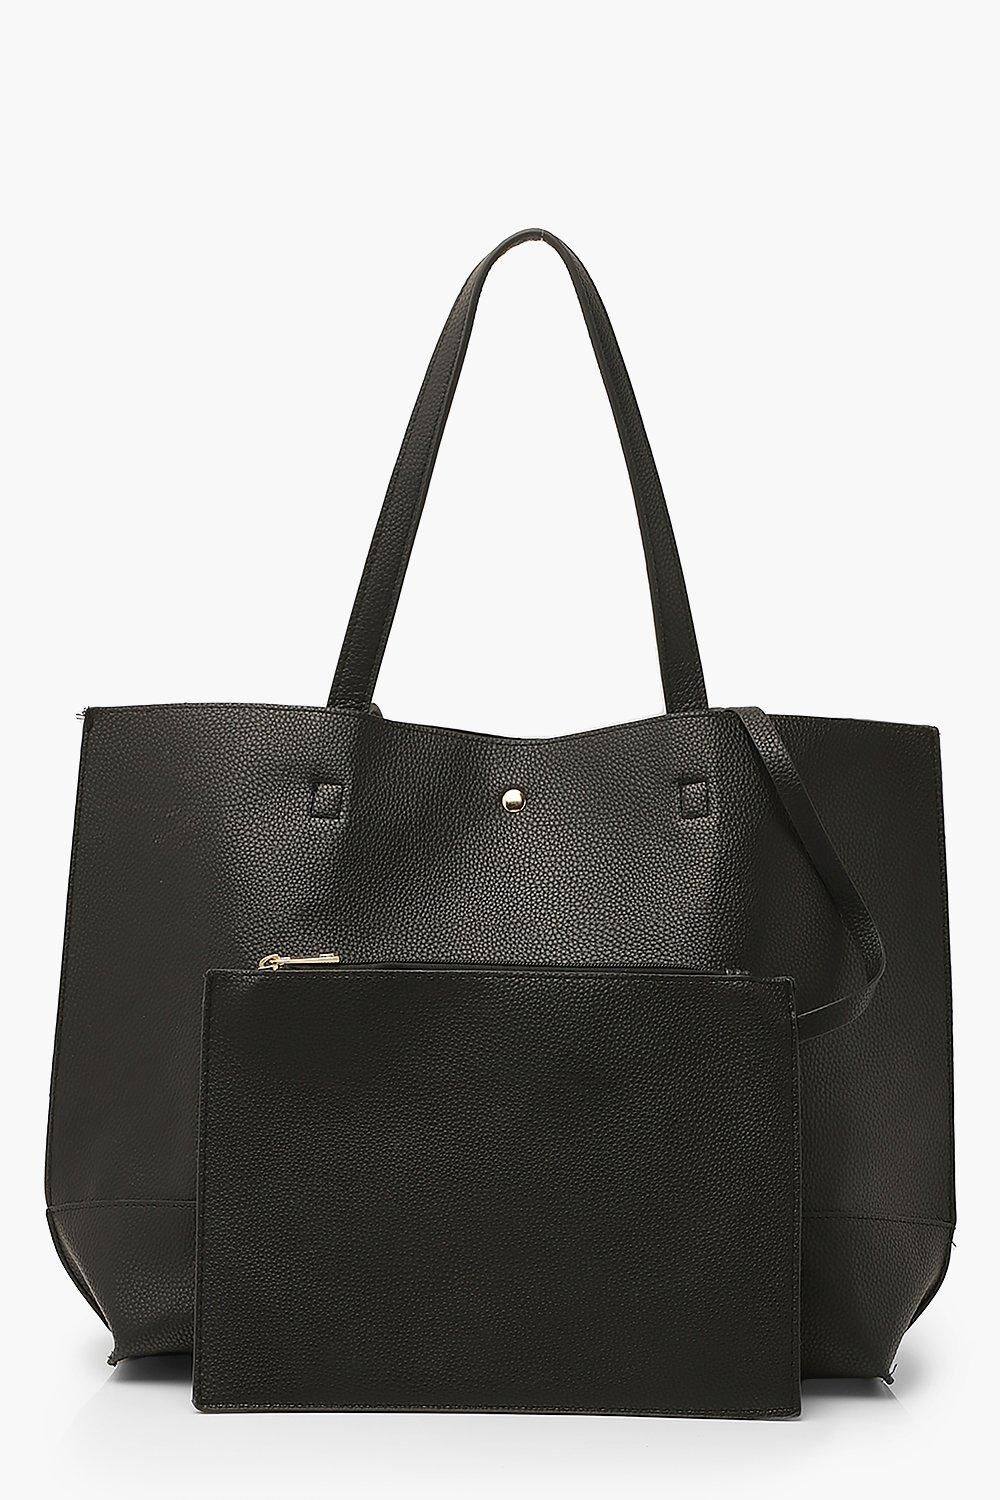 Boohoo Textured Pu Tote & Tablet Bag- Black  - Size: ONE SIZE